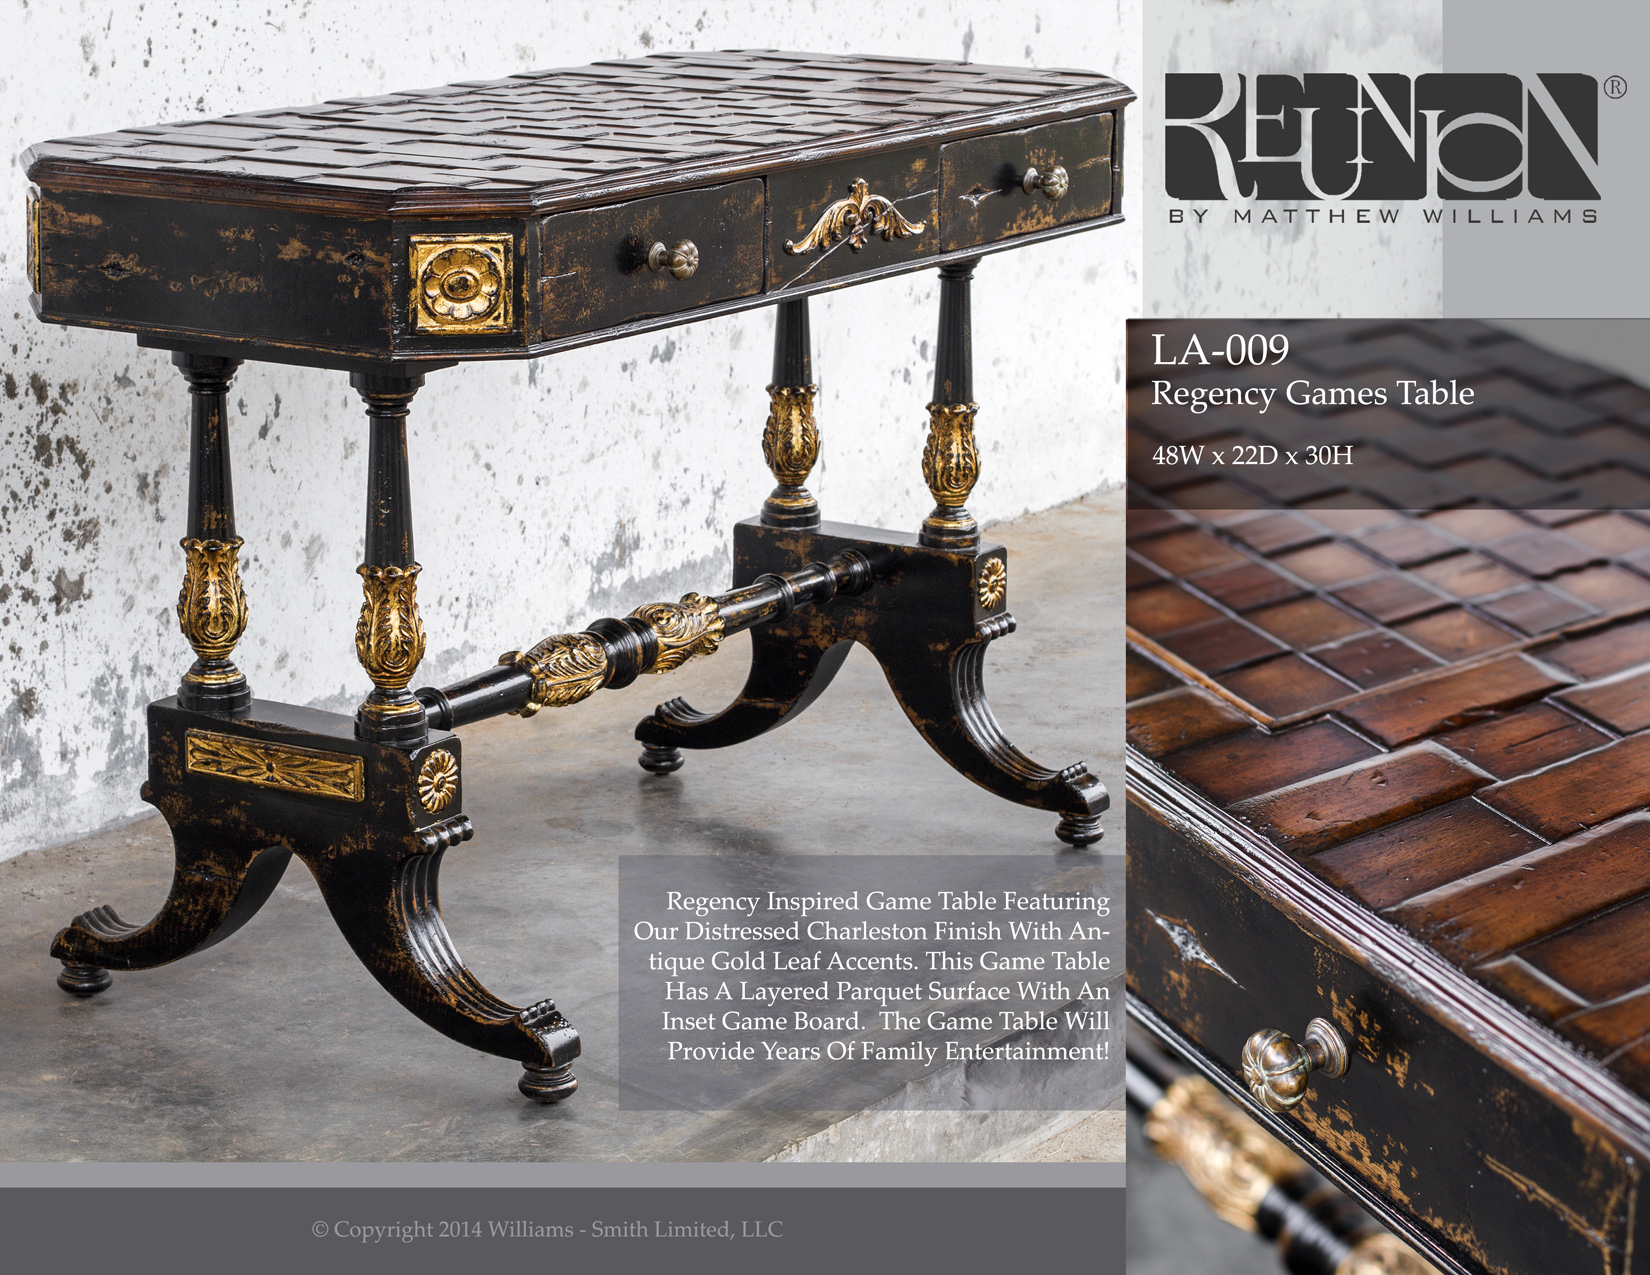 regency games table matthew williams accent game you also like obelisk console dining small night lamps furniture vale corner cabinet metal bedside carpet transition strip drawer